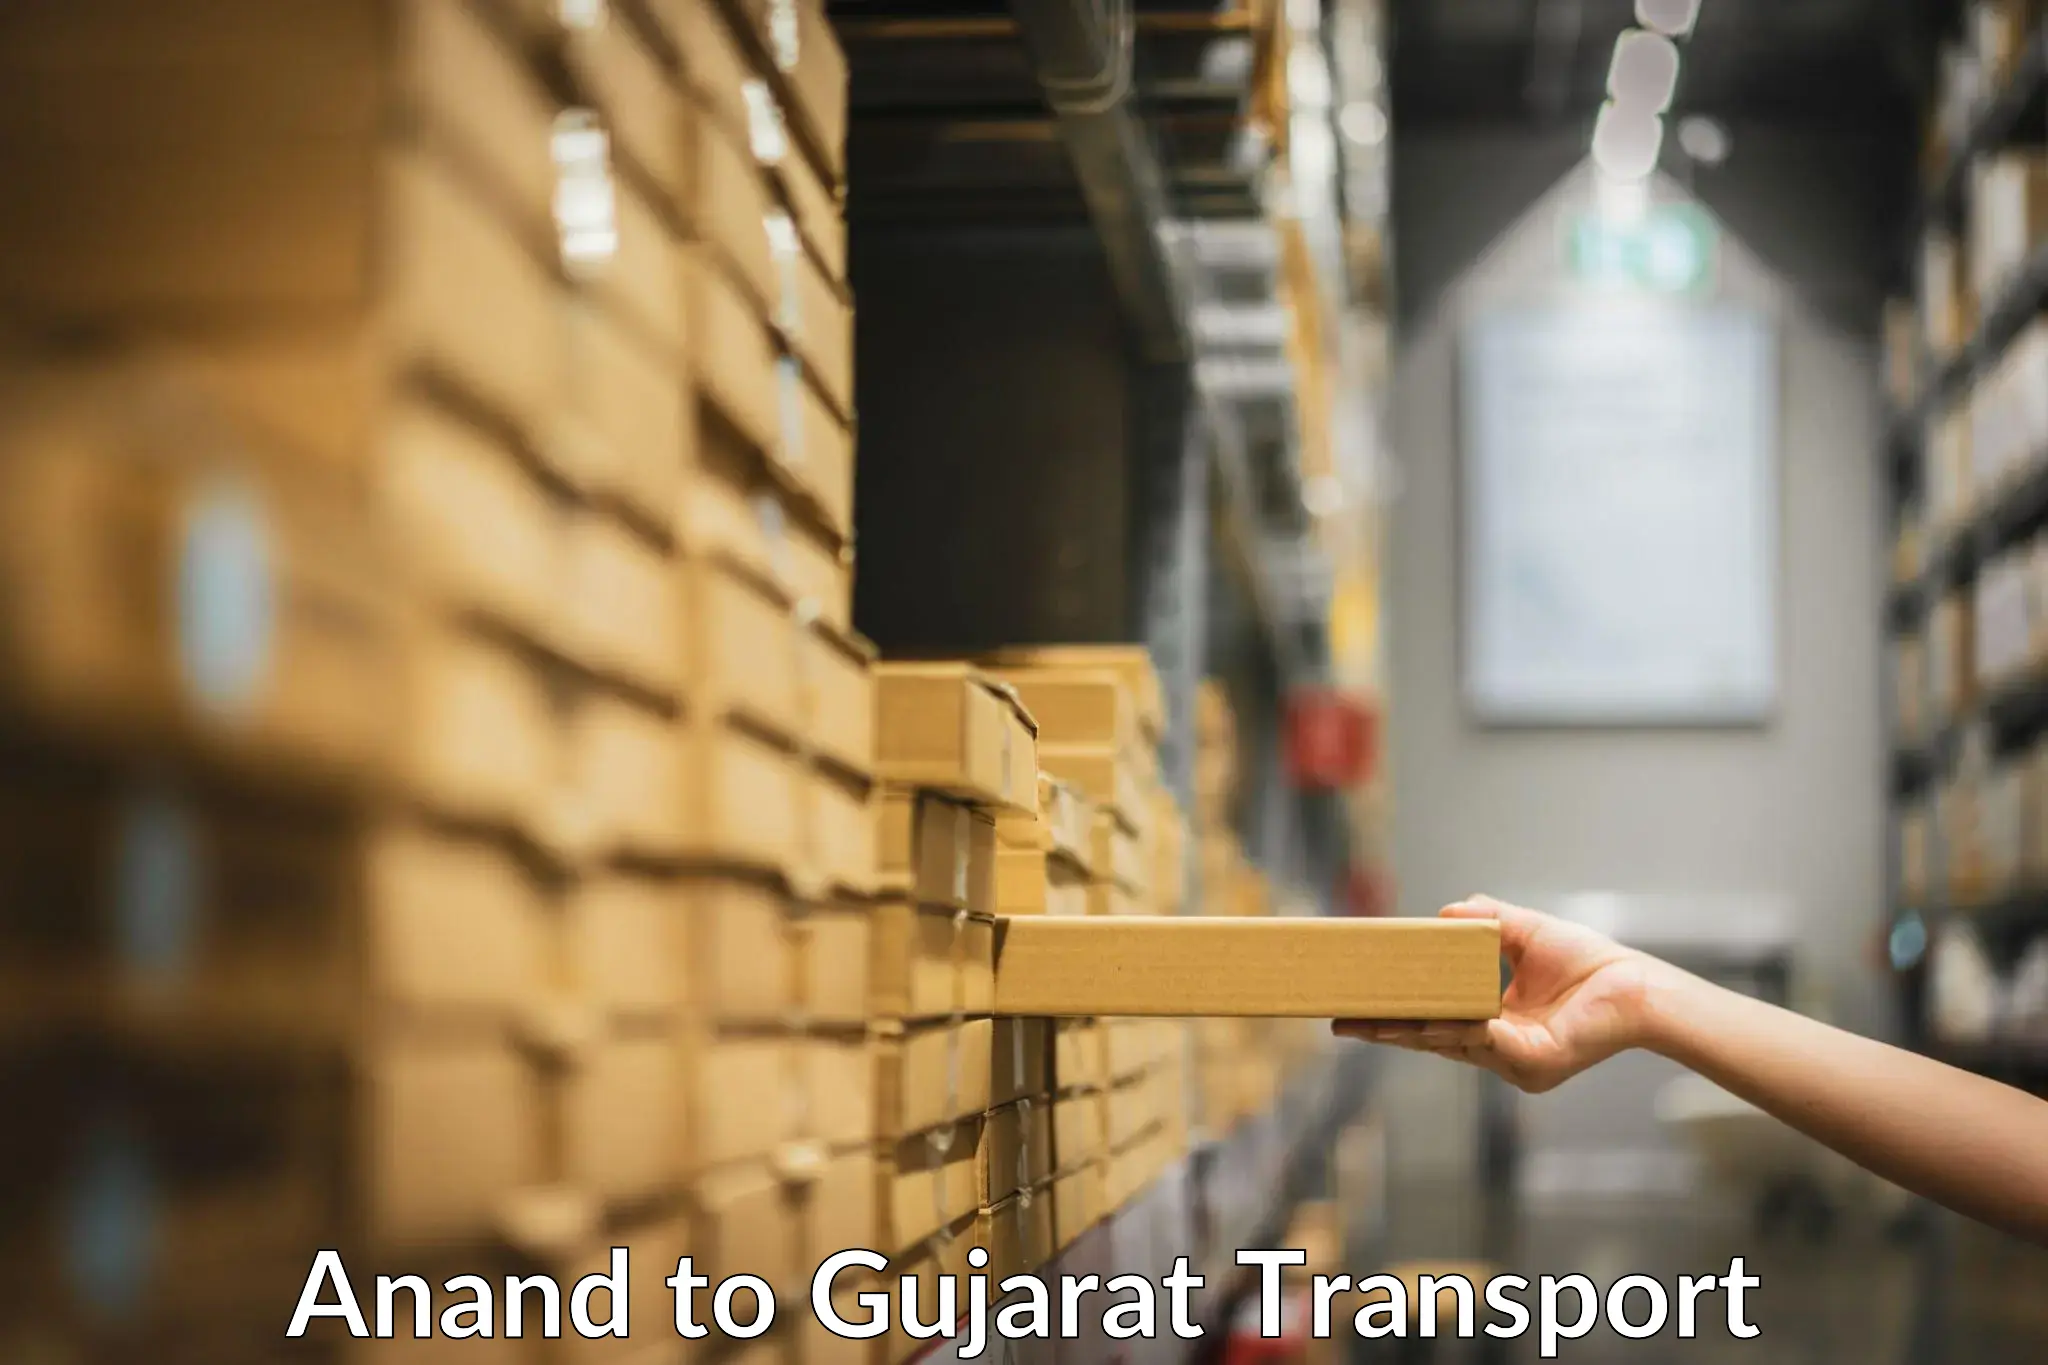 Parcel transport services Anand to Ahmedabad